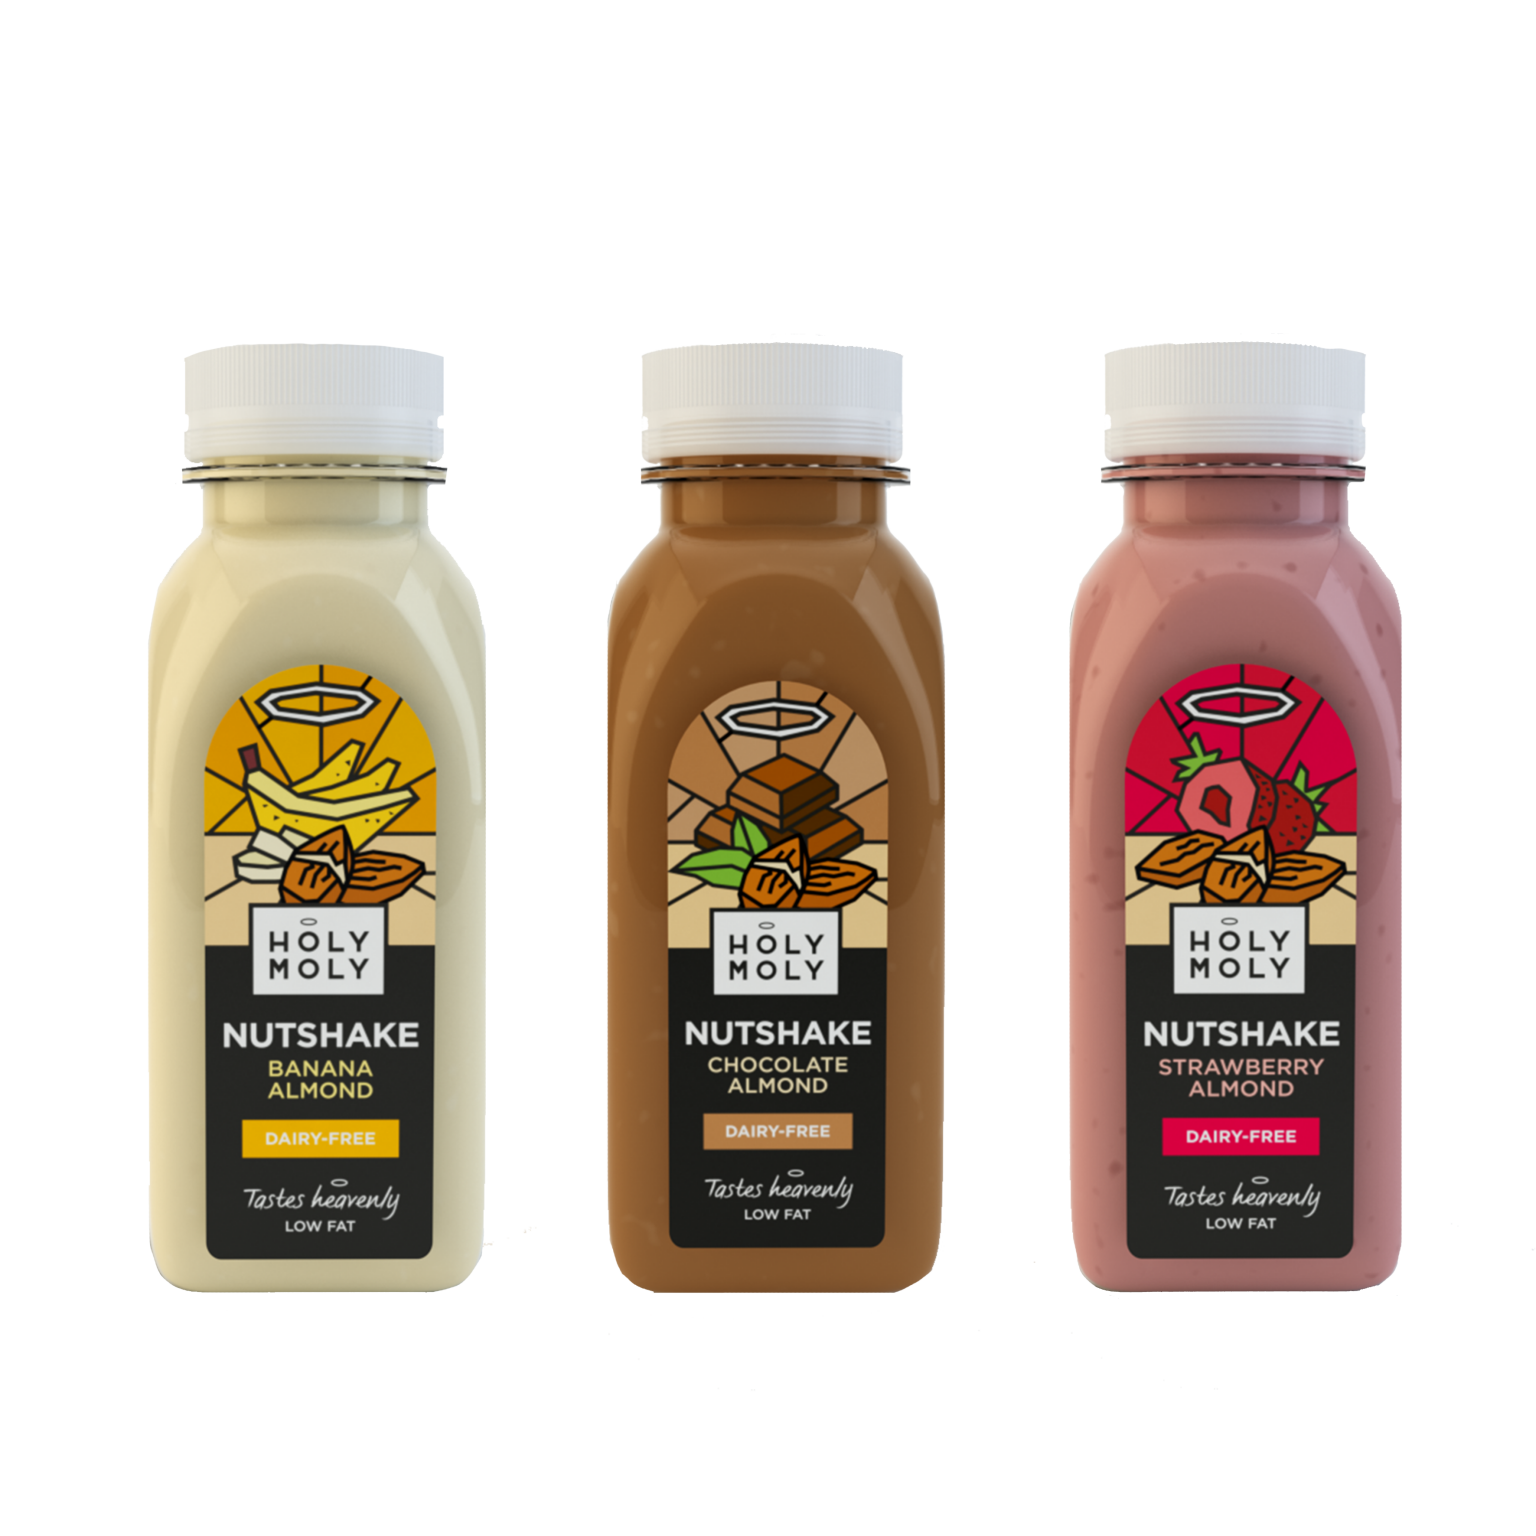 Holy Moly Launches Range of Cold-Pressed Nutshakes